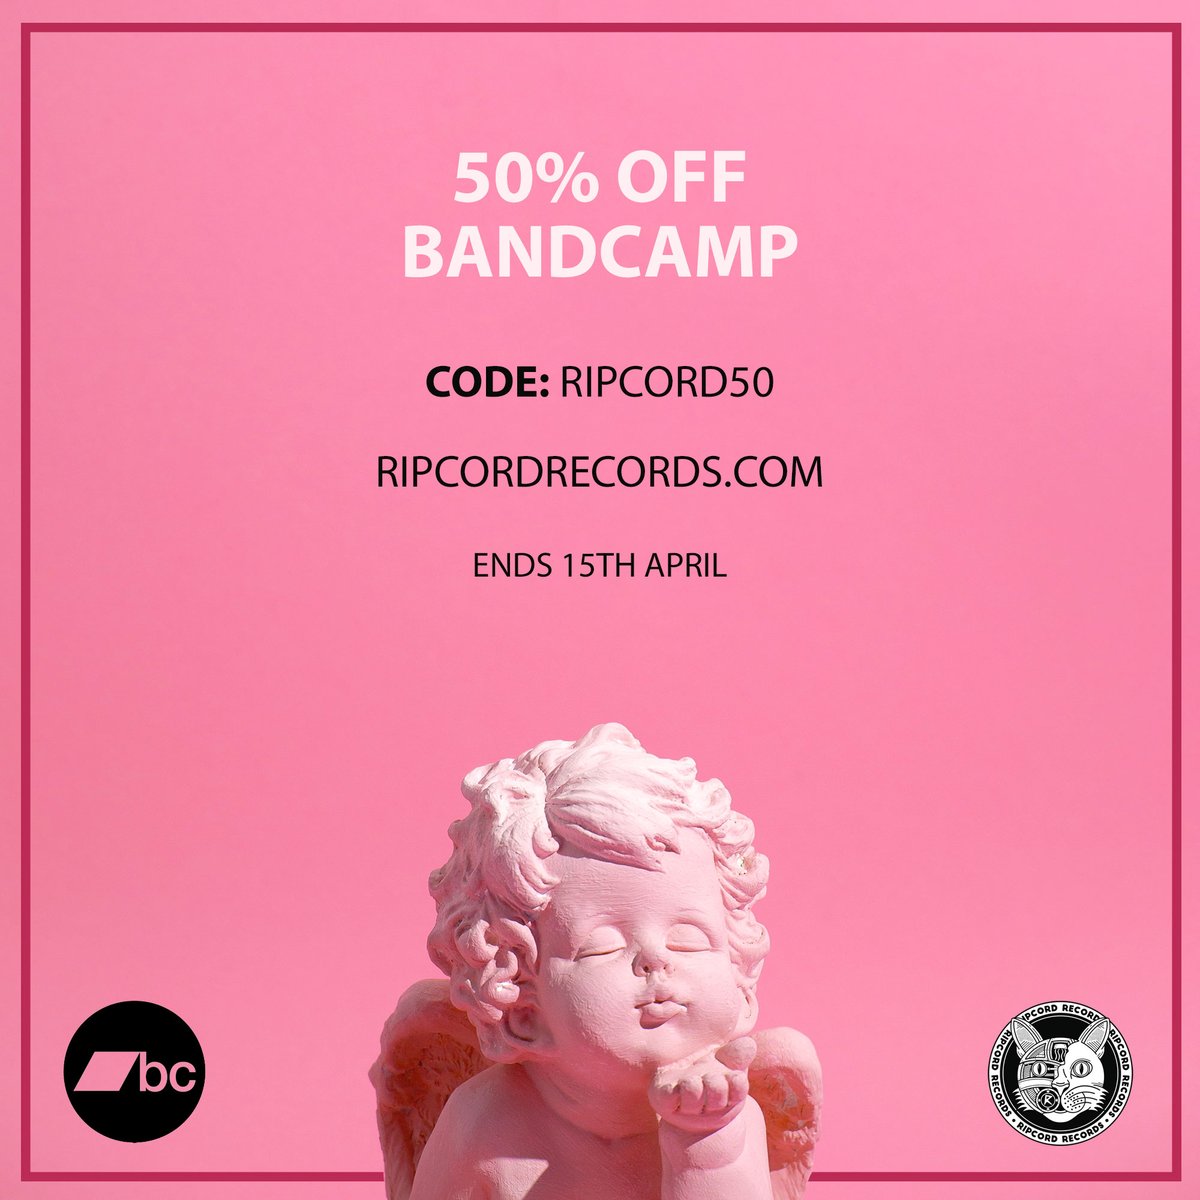 Here you go. Valid on everything. ripcordrecords.com